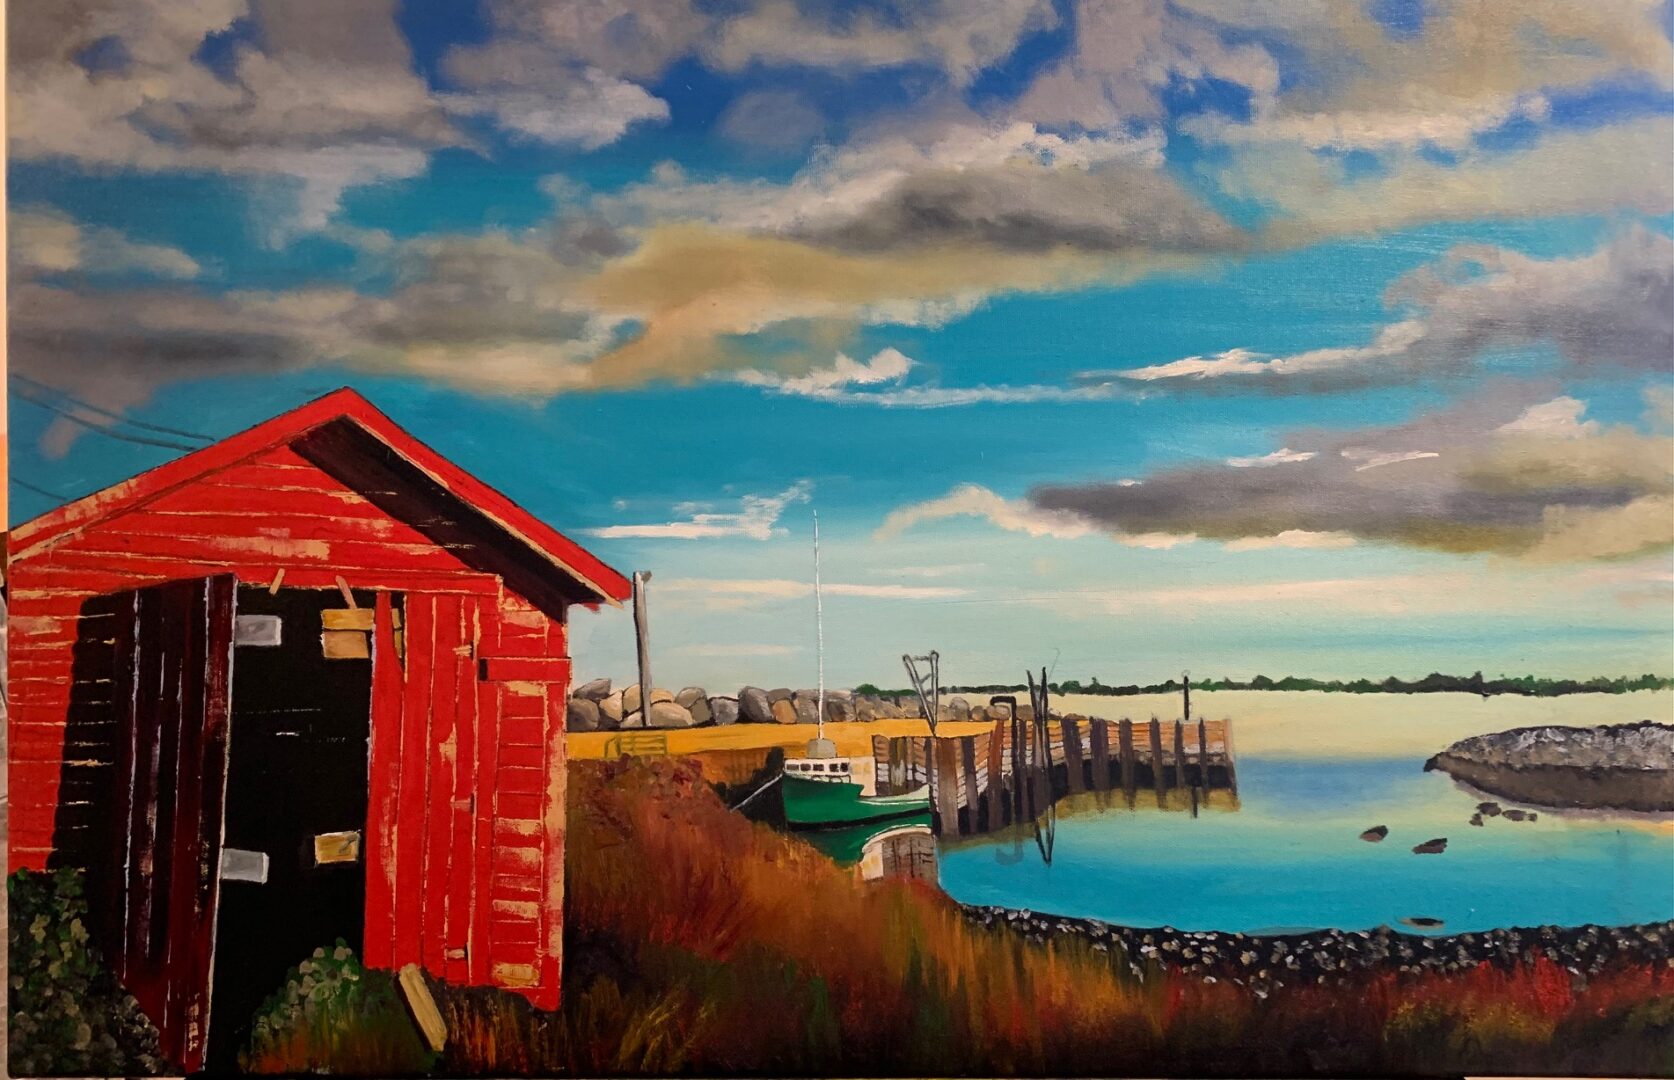 Painting of a coastal landscape including clouds and a red barn in foreground.